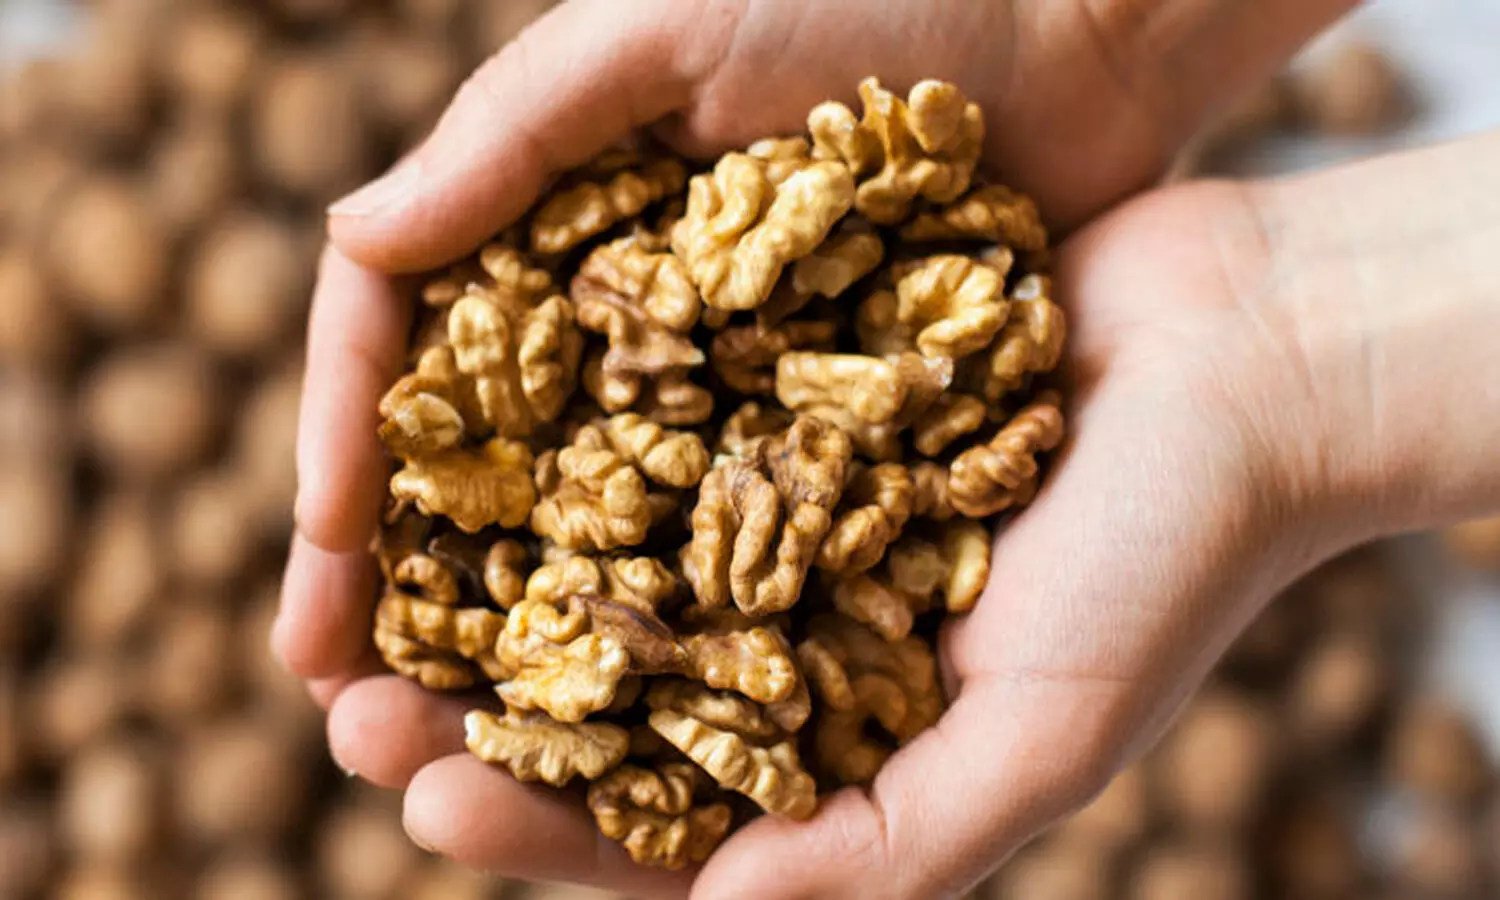 Eating Walnuts lowers Bad Cholesterol and may reduce risk of heart disease